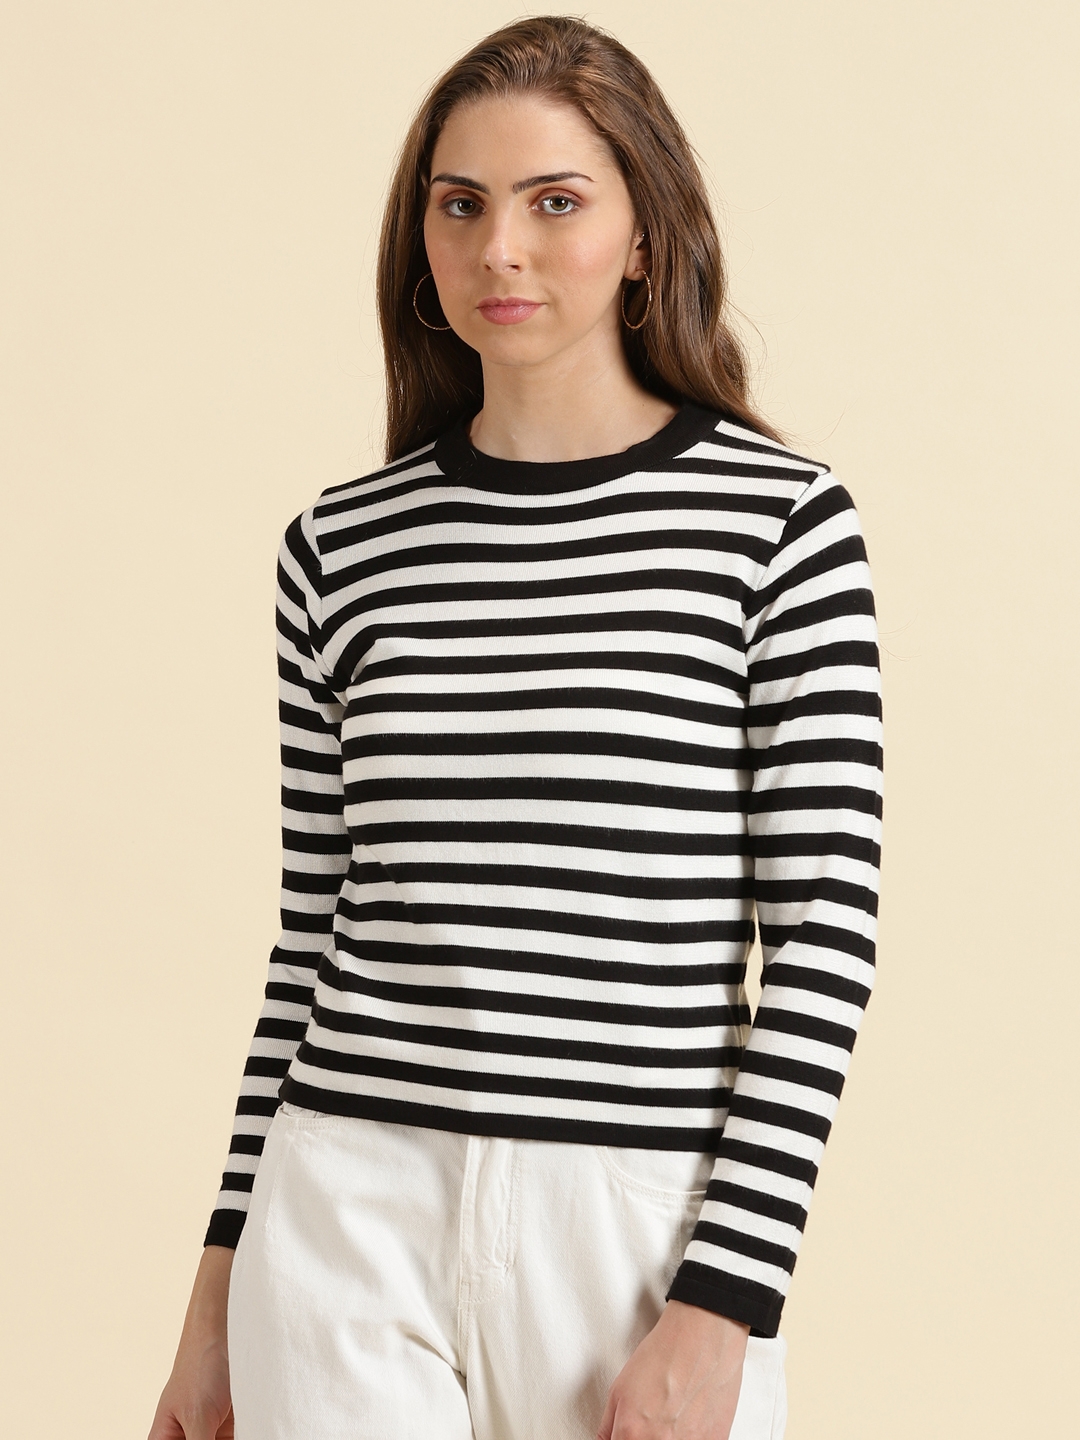 Showoff | SHOWOFF Women's Round Neck Striped Black Fitted Regular Top 1